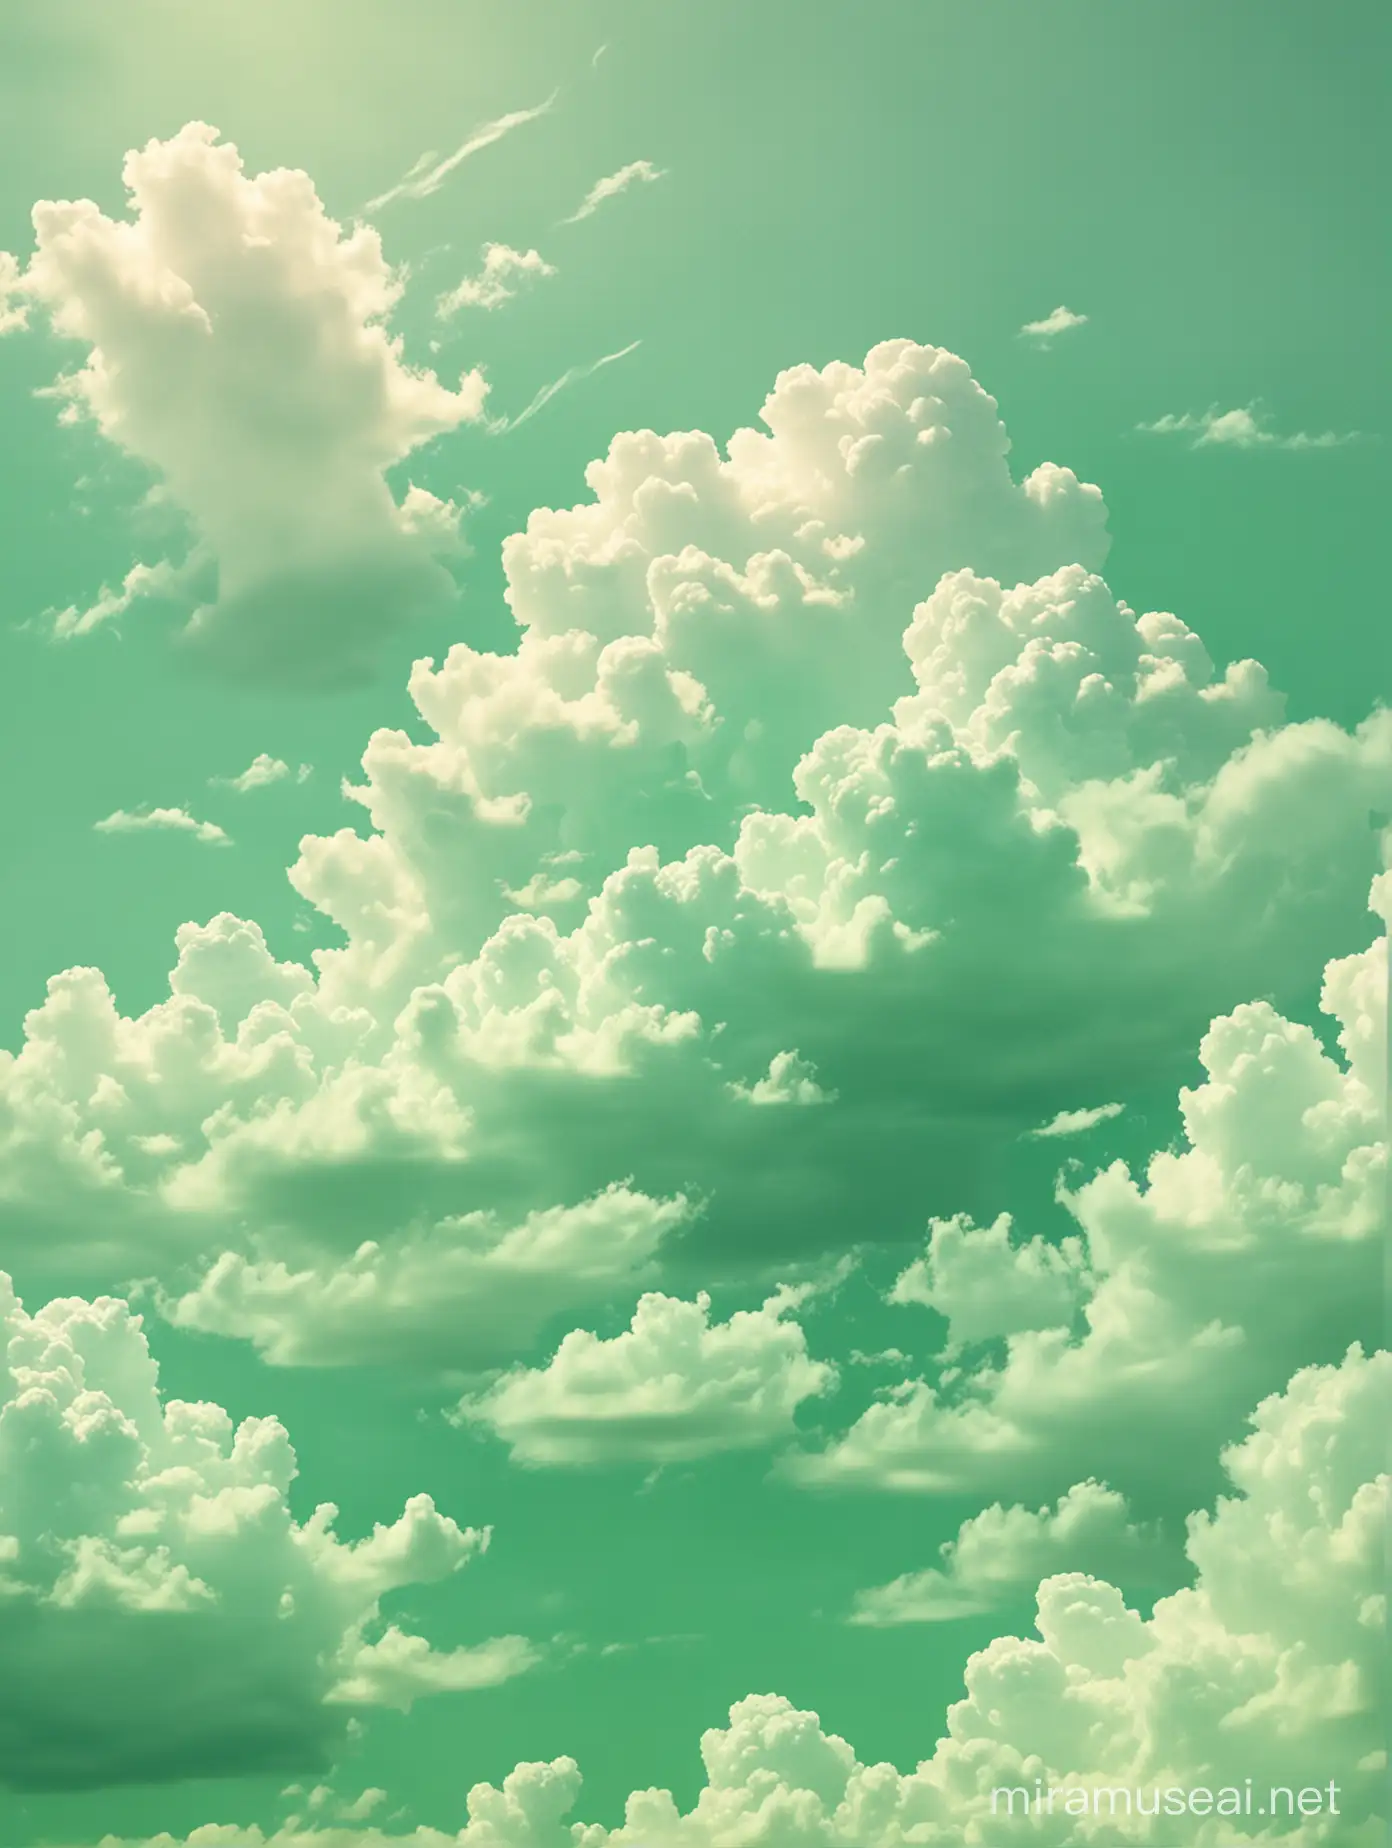 Surreal pastel green background with green clouds